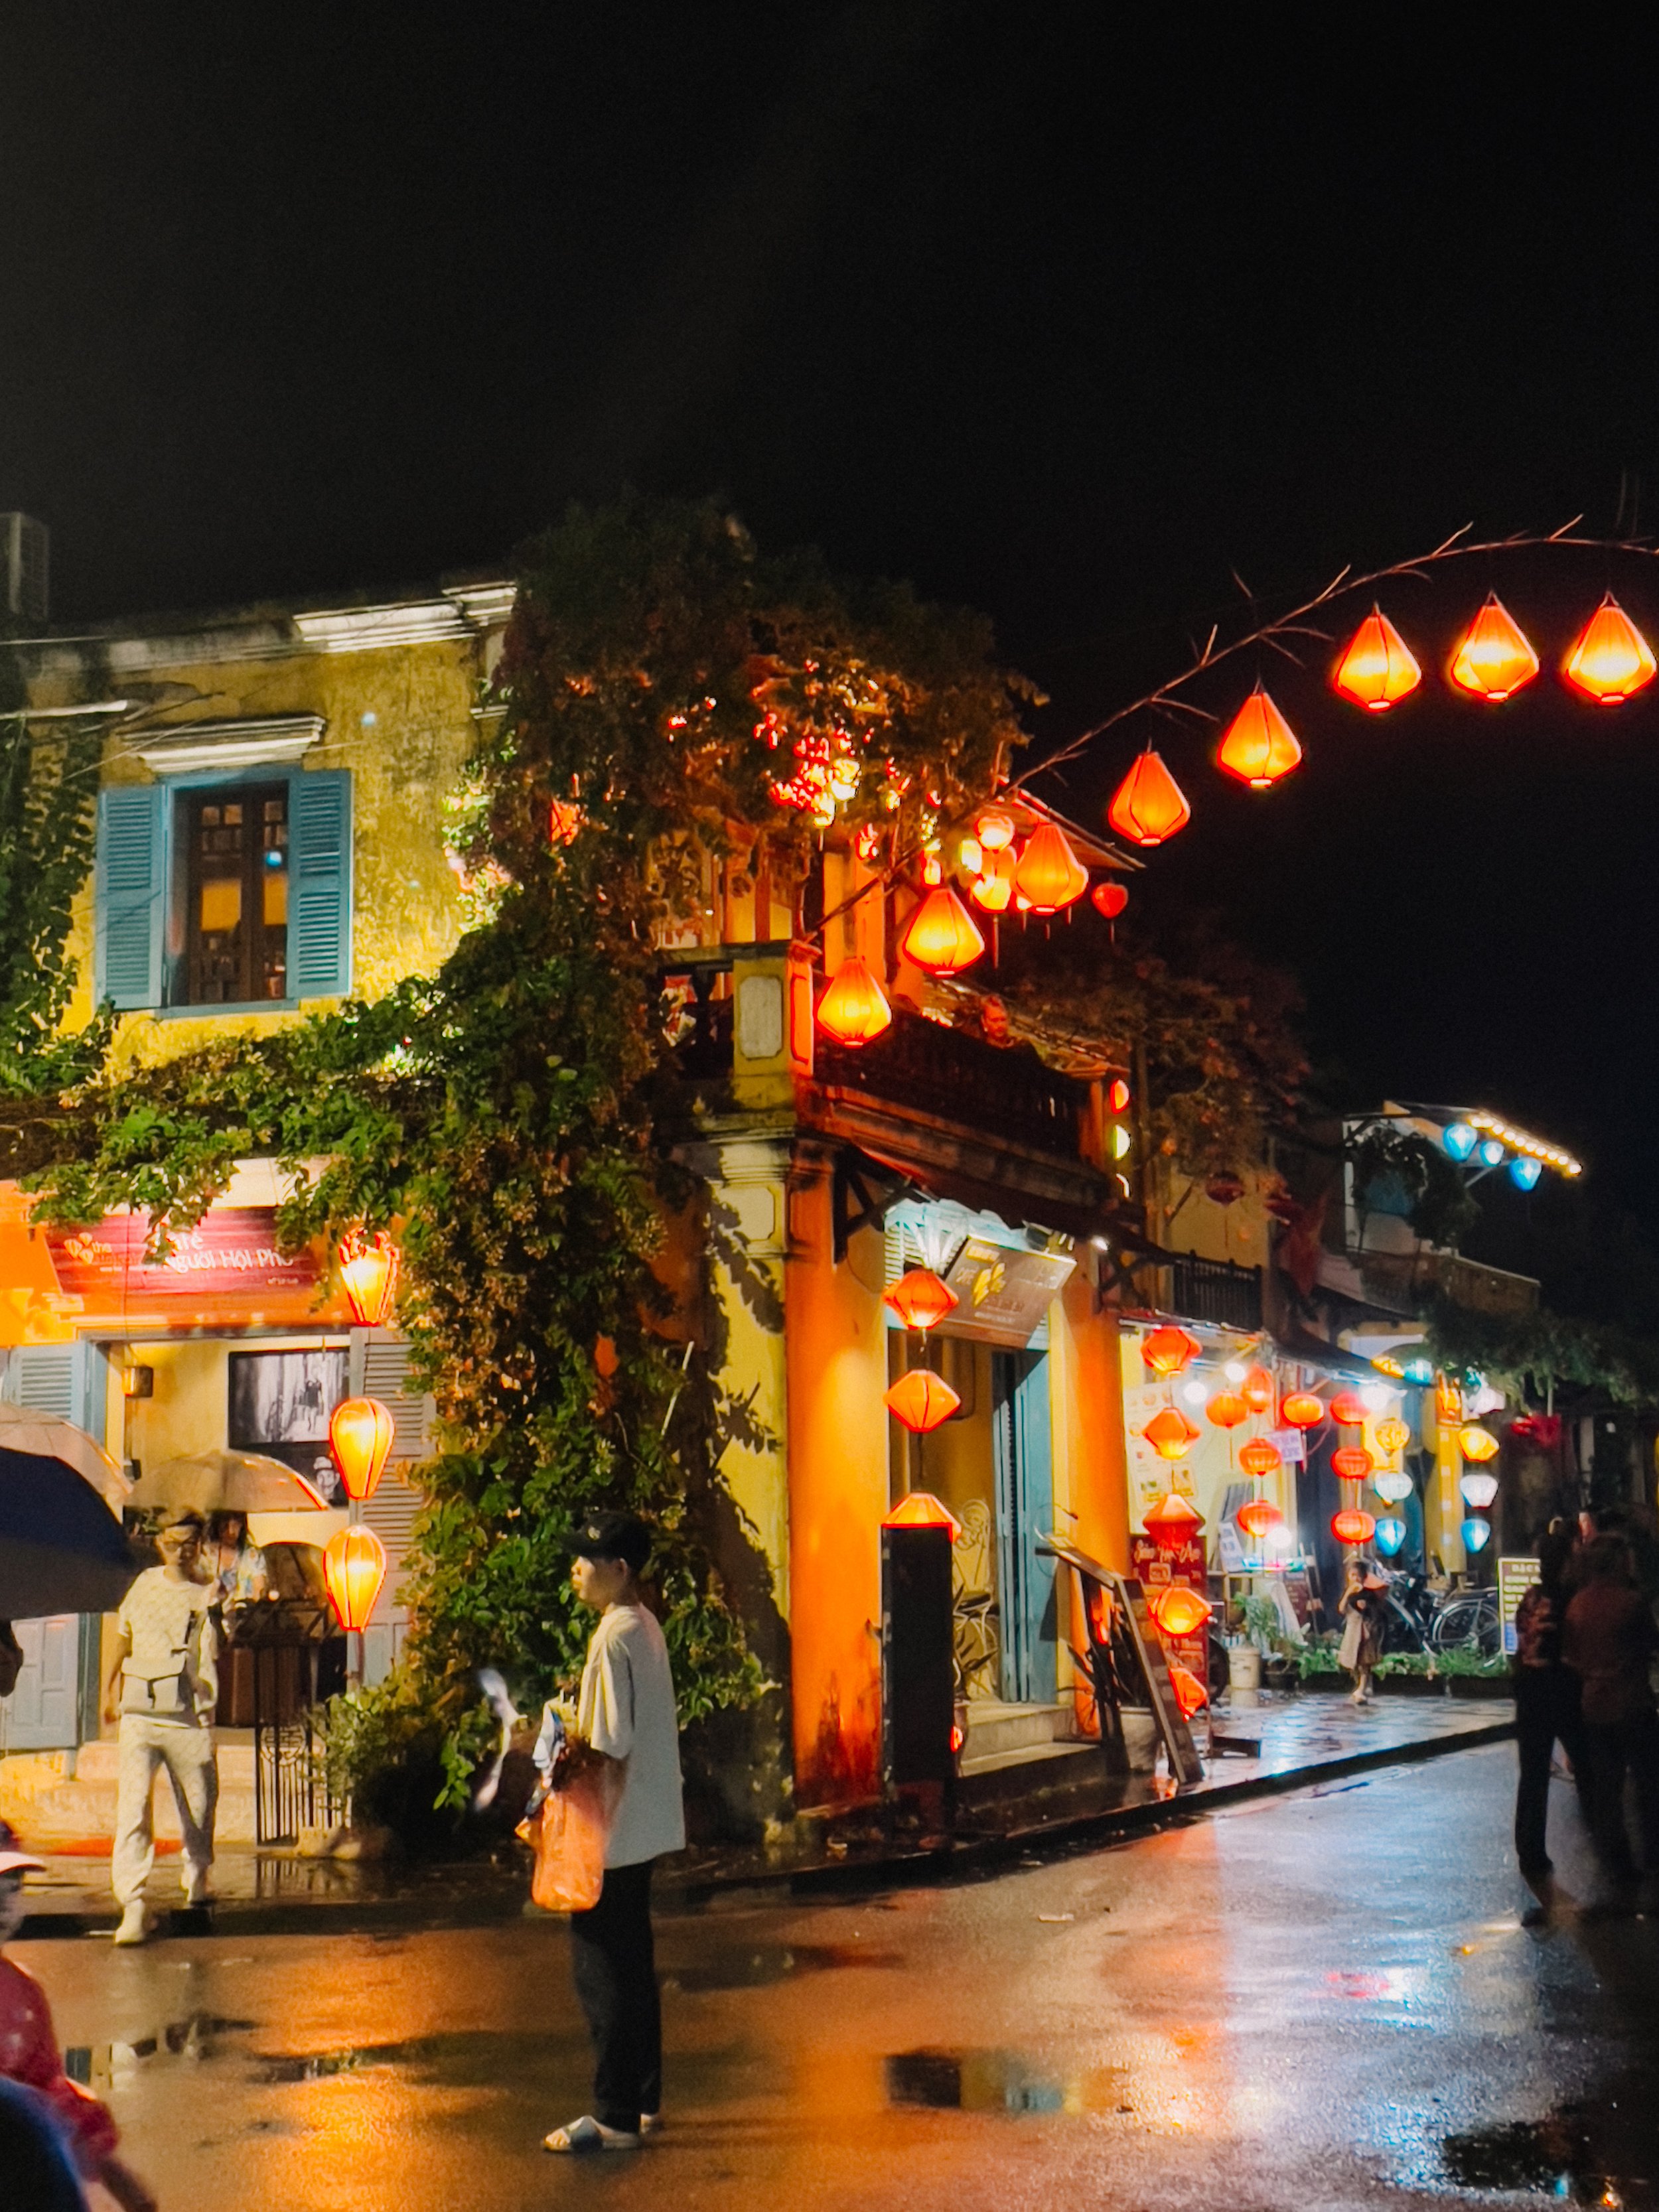 How Many Days should you spend in Hoi An?